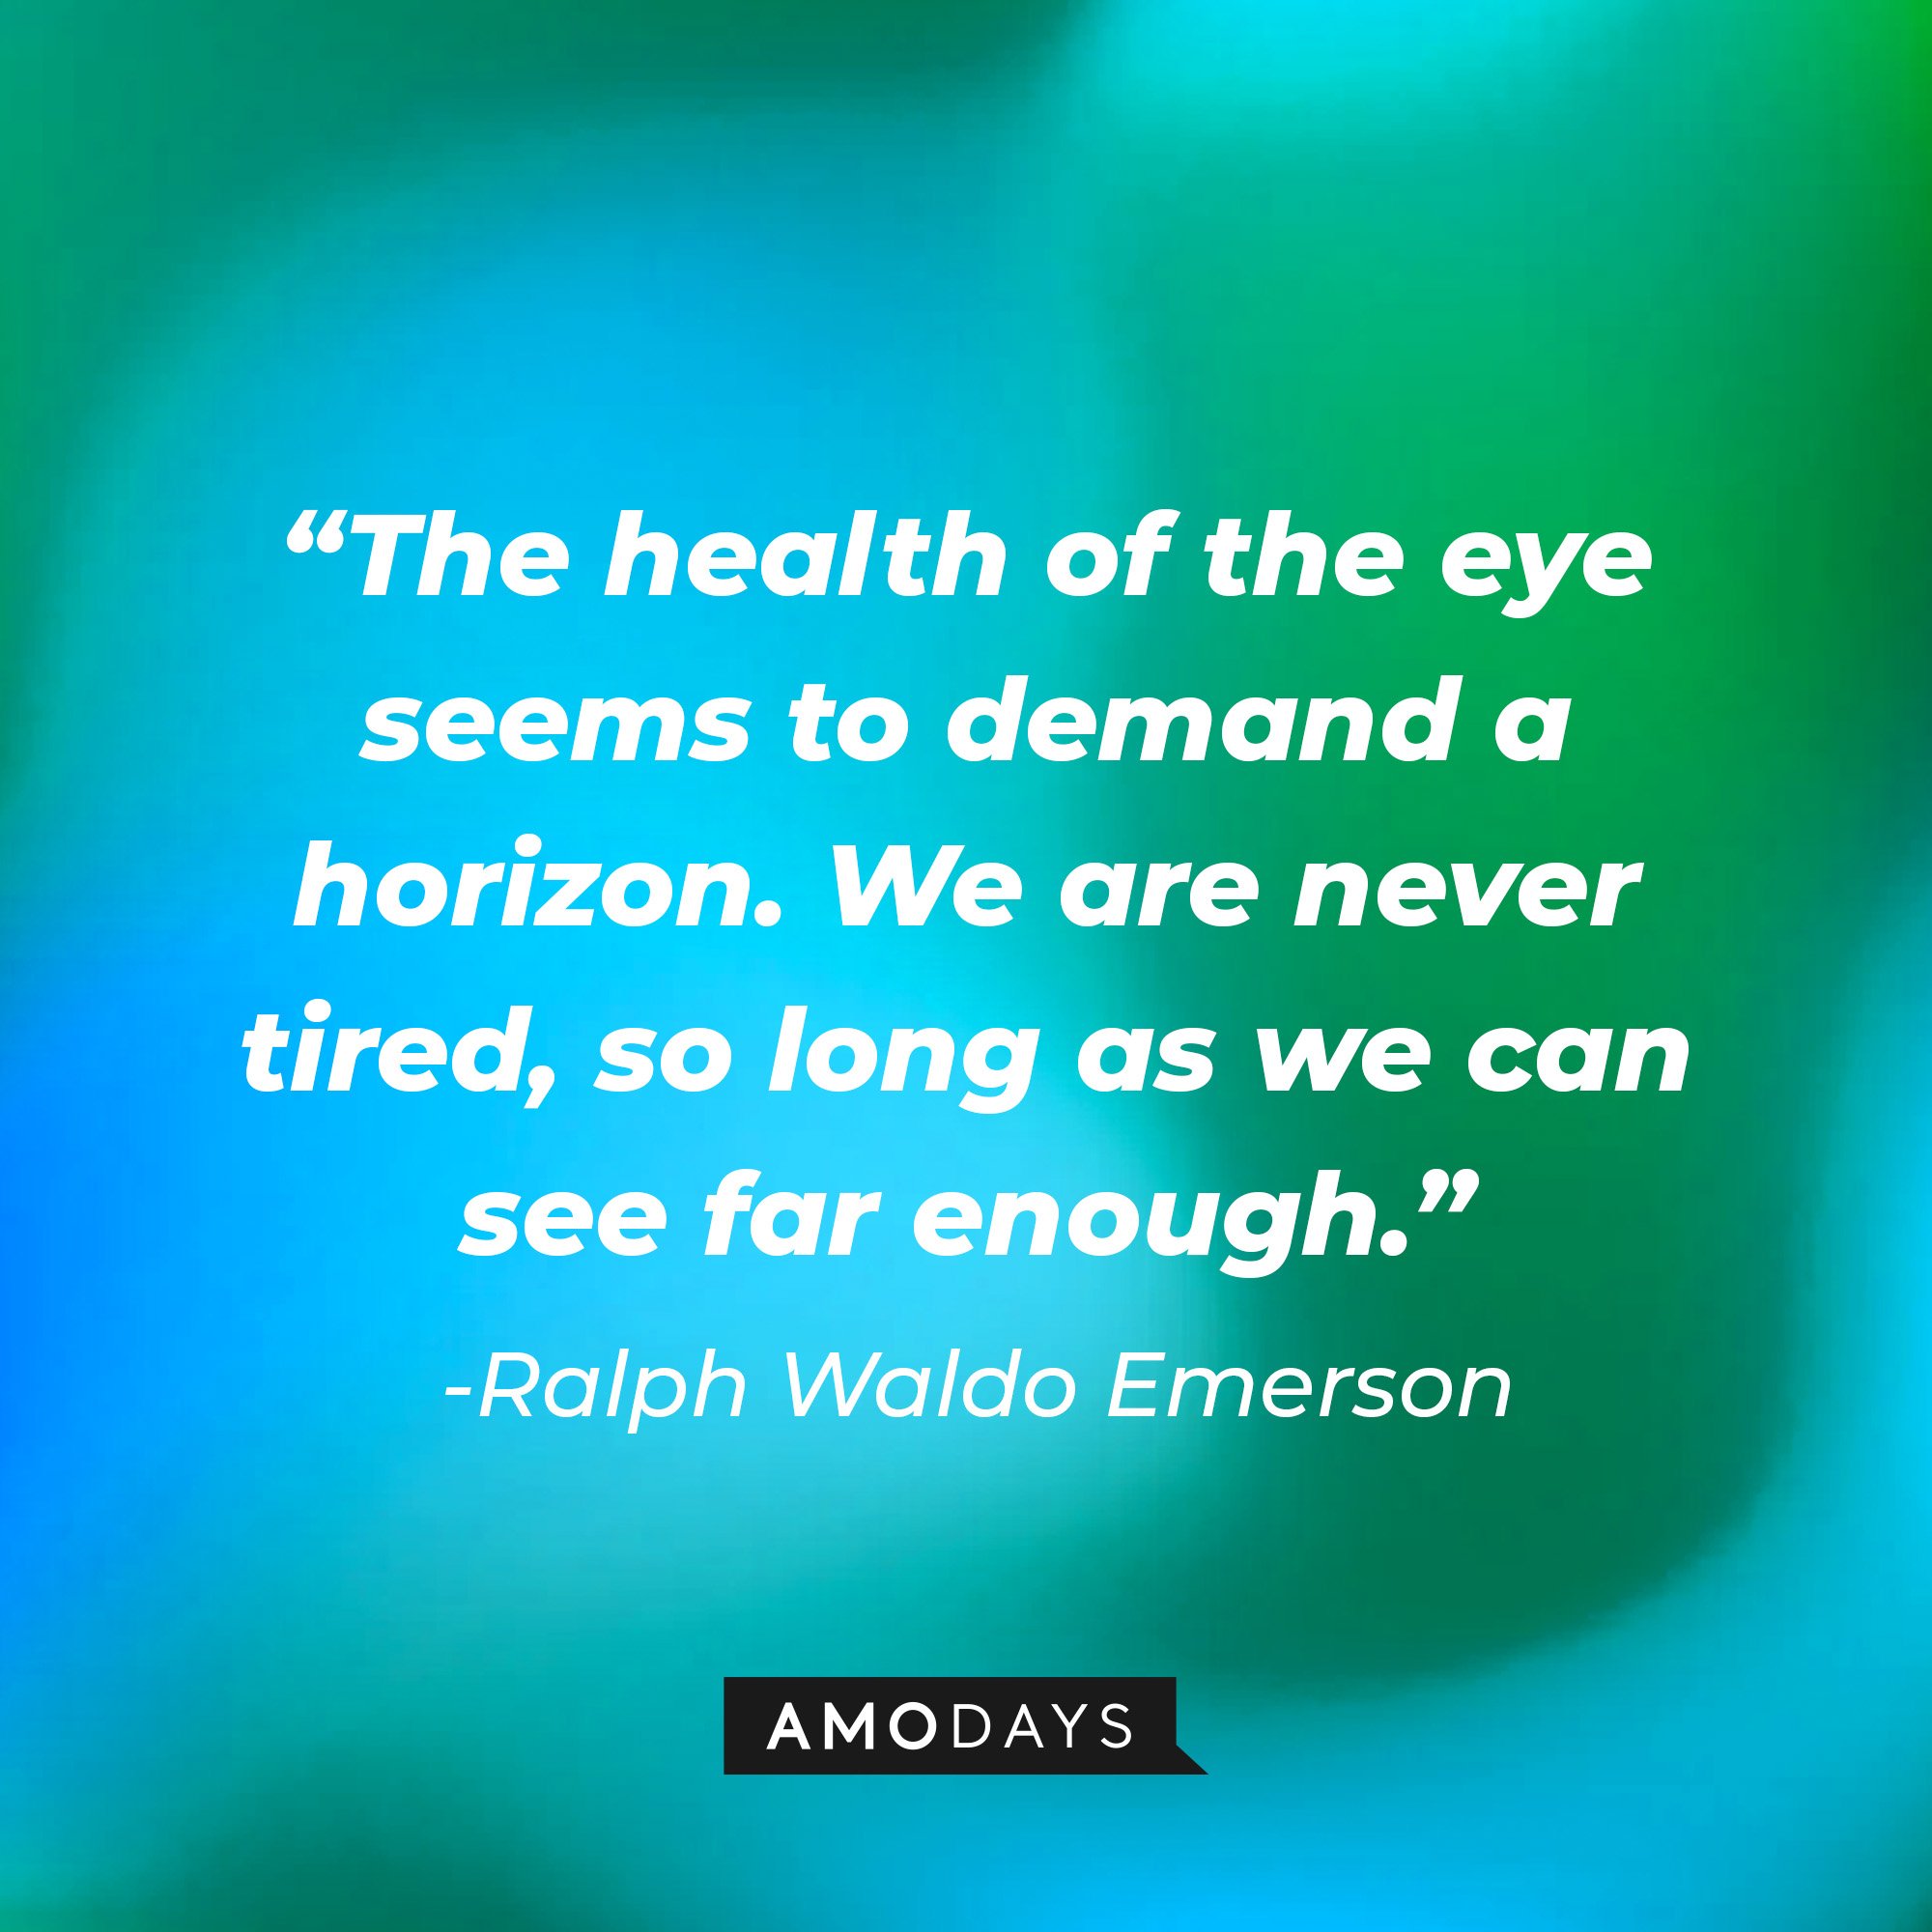  Ralph Waldo Emerson's quote: “The health of the eye seems to demand a horizon. We are never tired, so long as we can see far enough.” | Image: AmoDays